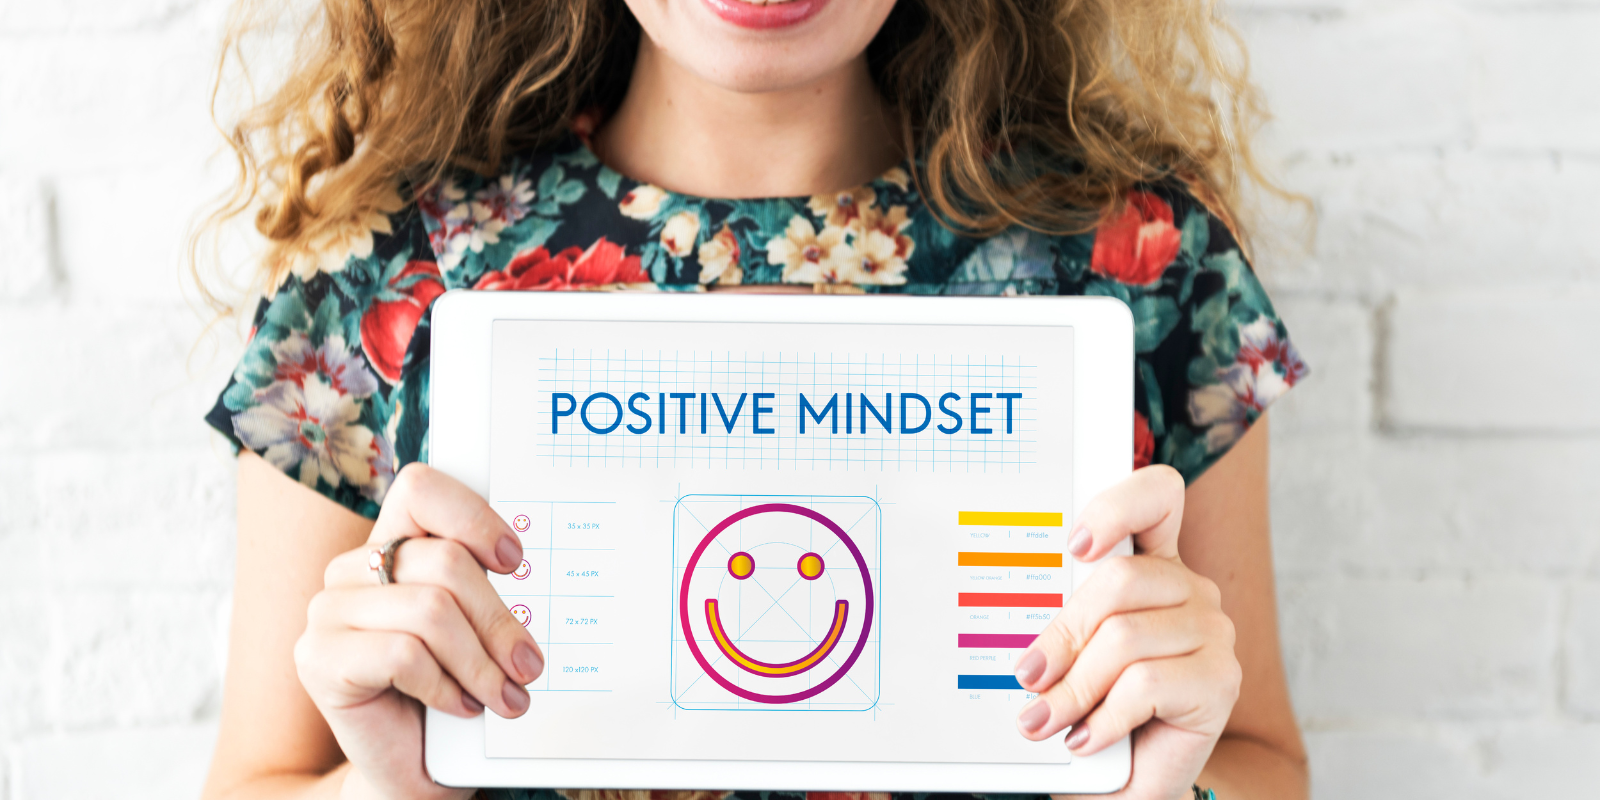 How to Change Your Mindset for More Positive Outcomes